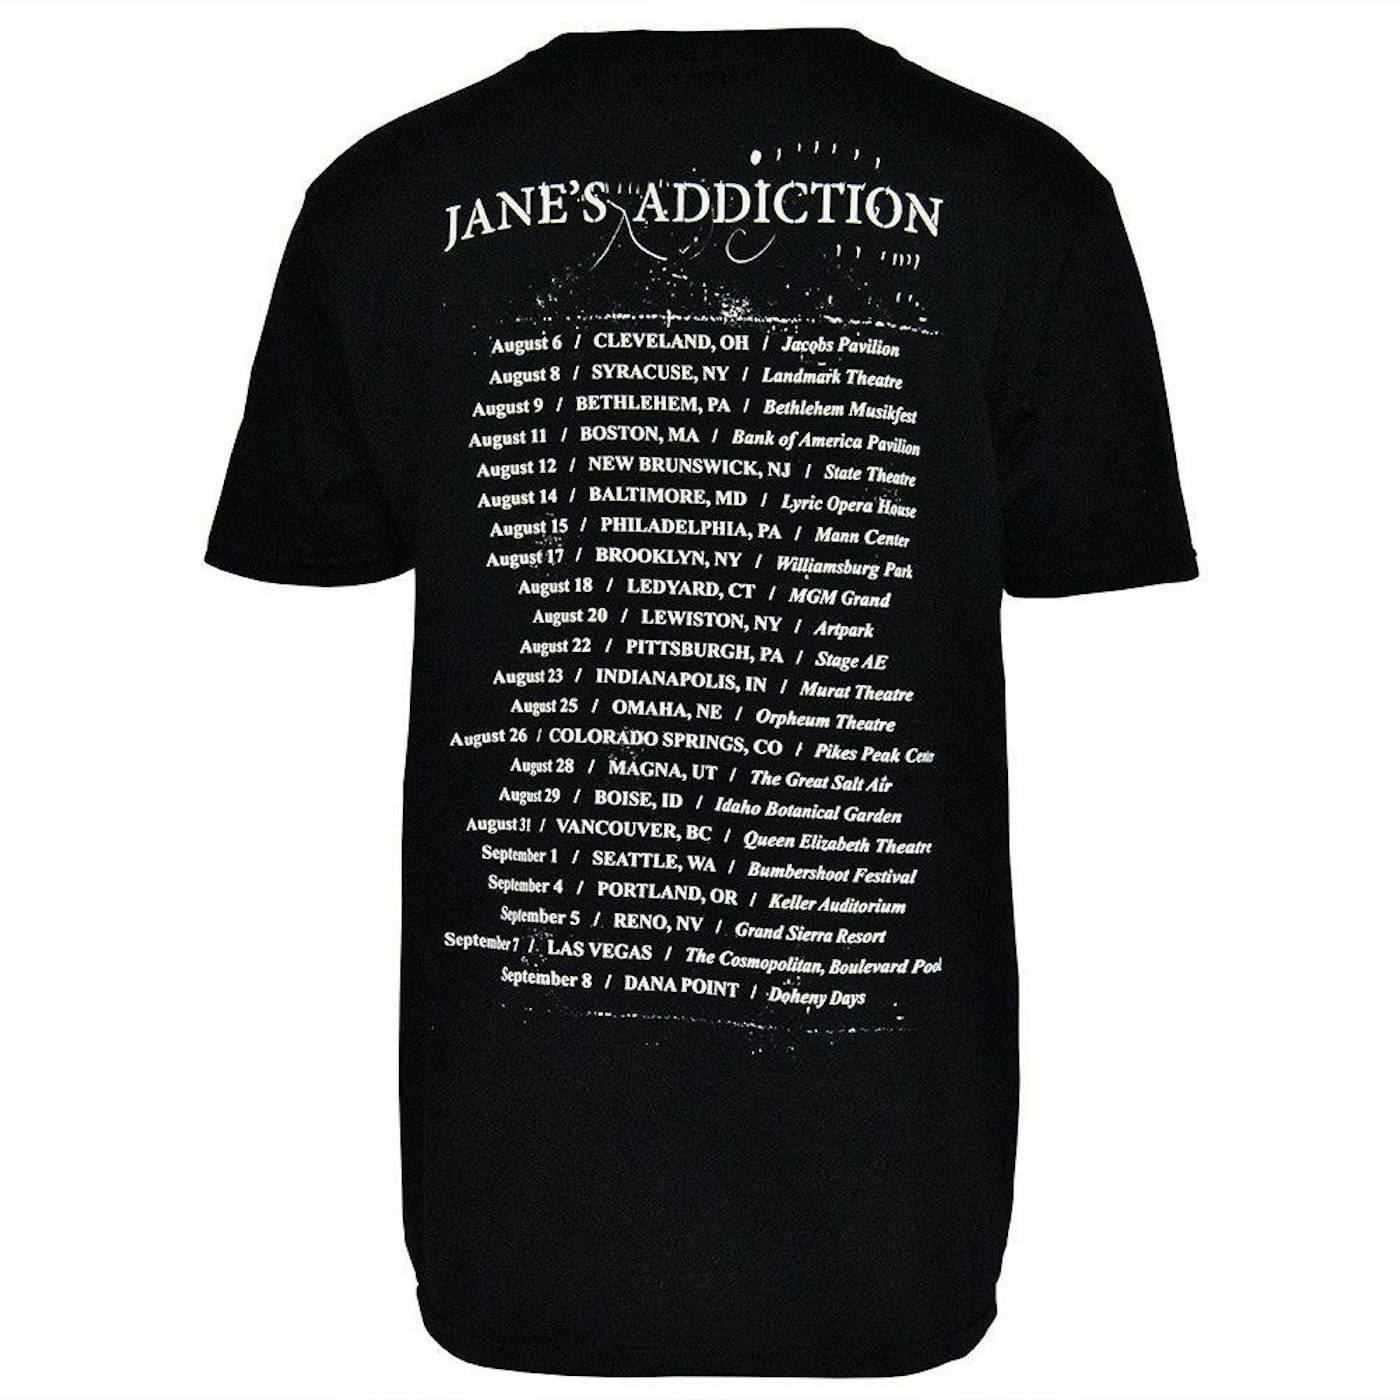 Jane's Addiction The Day I Saw Her Tour- 3rd Leg